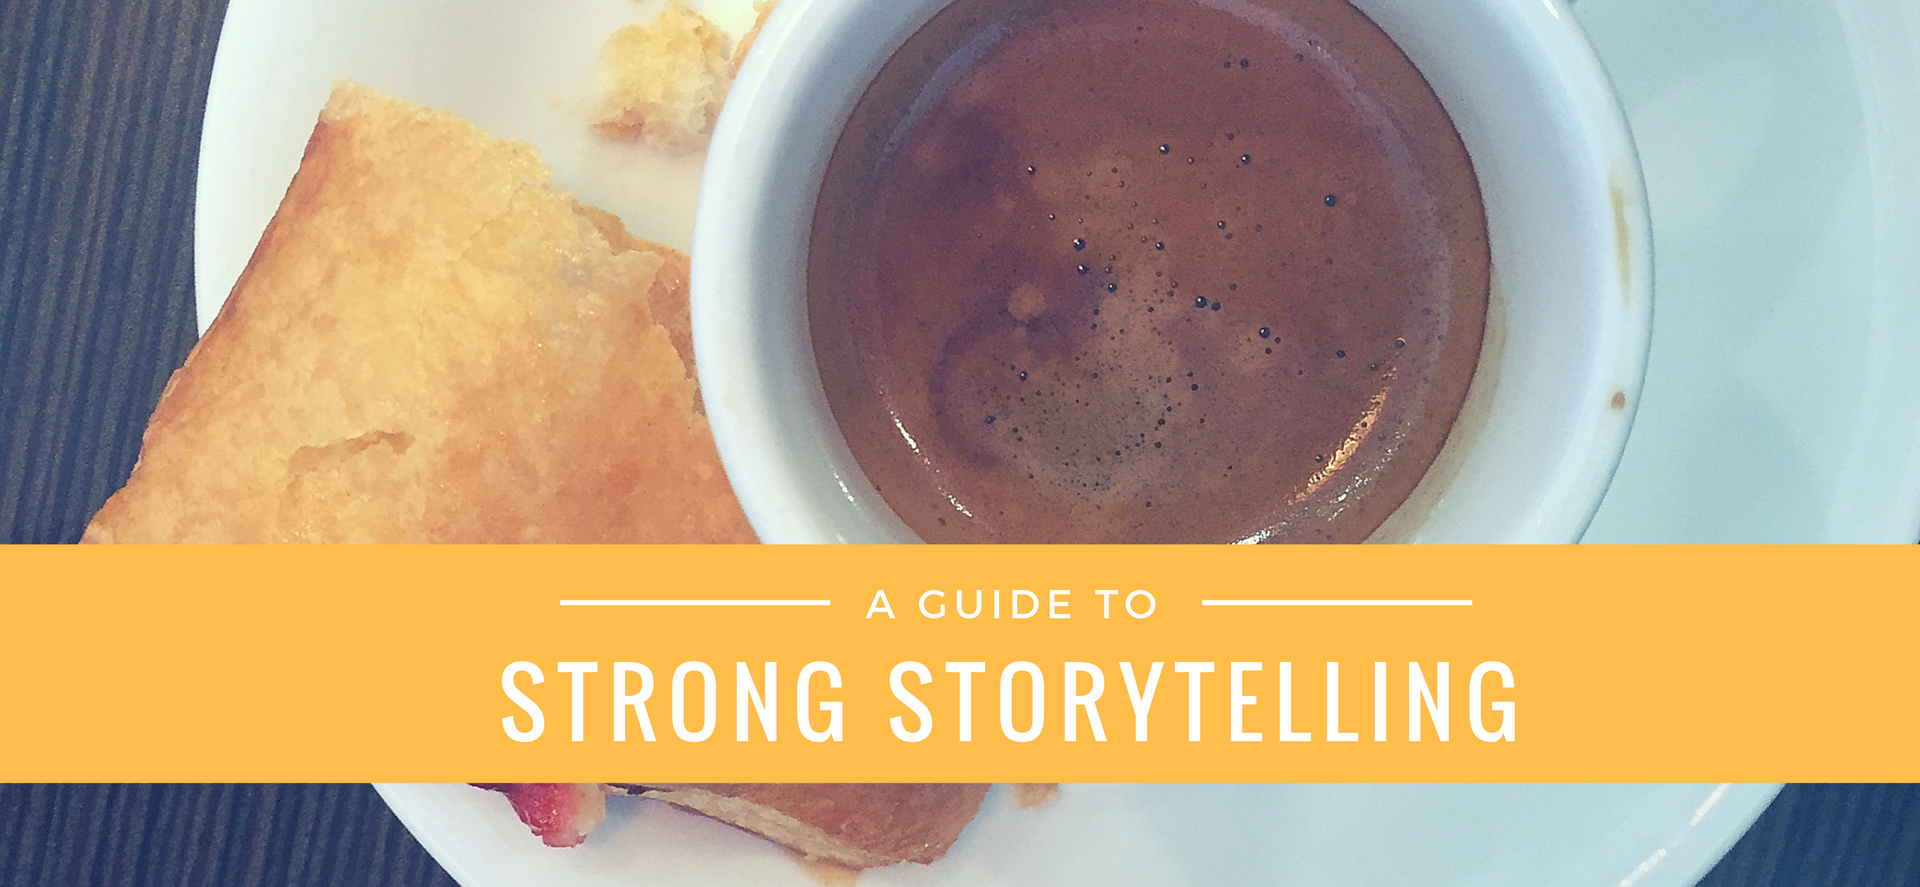 A Guide To Strong Storytelling